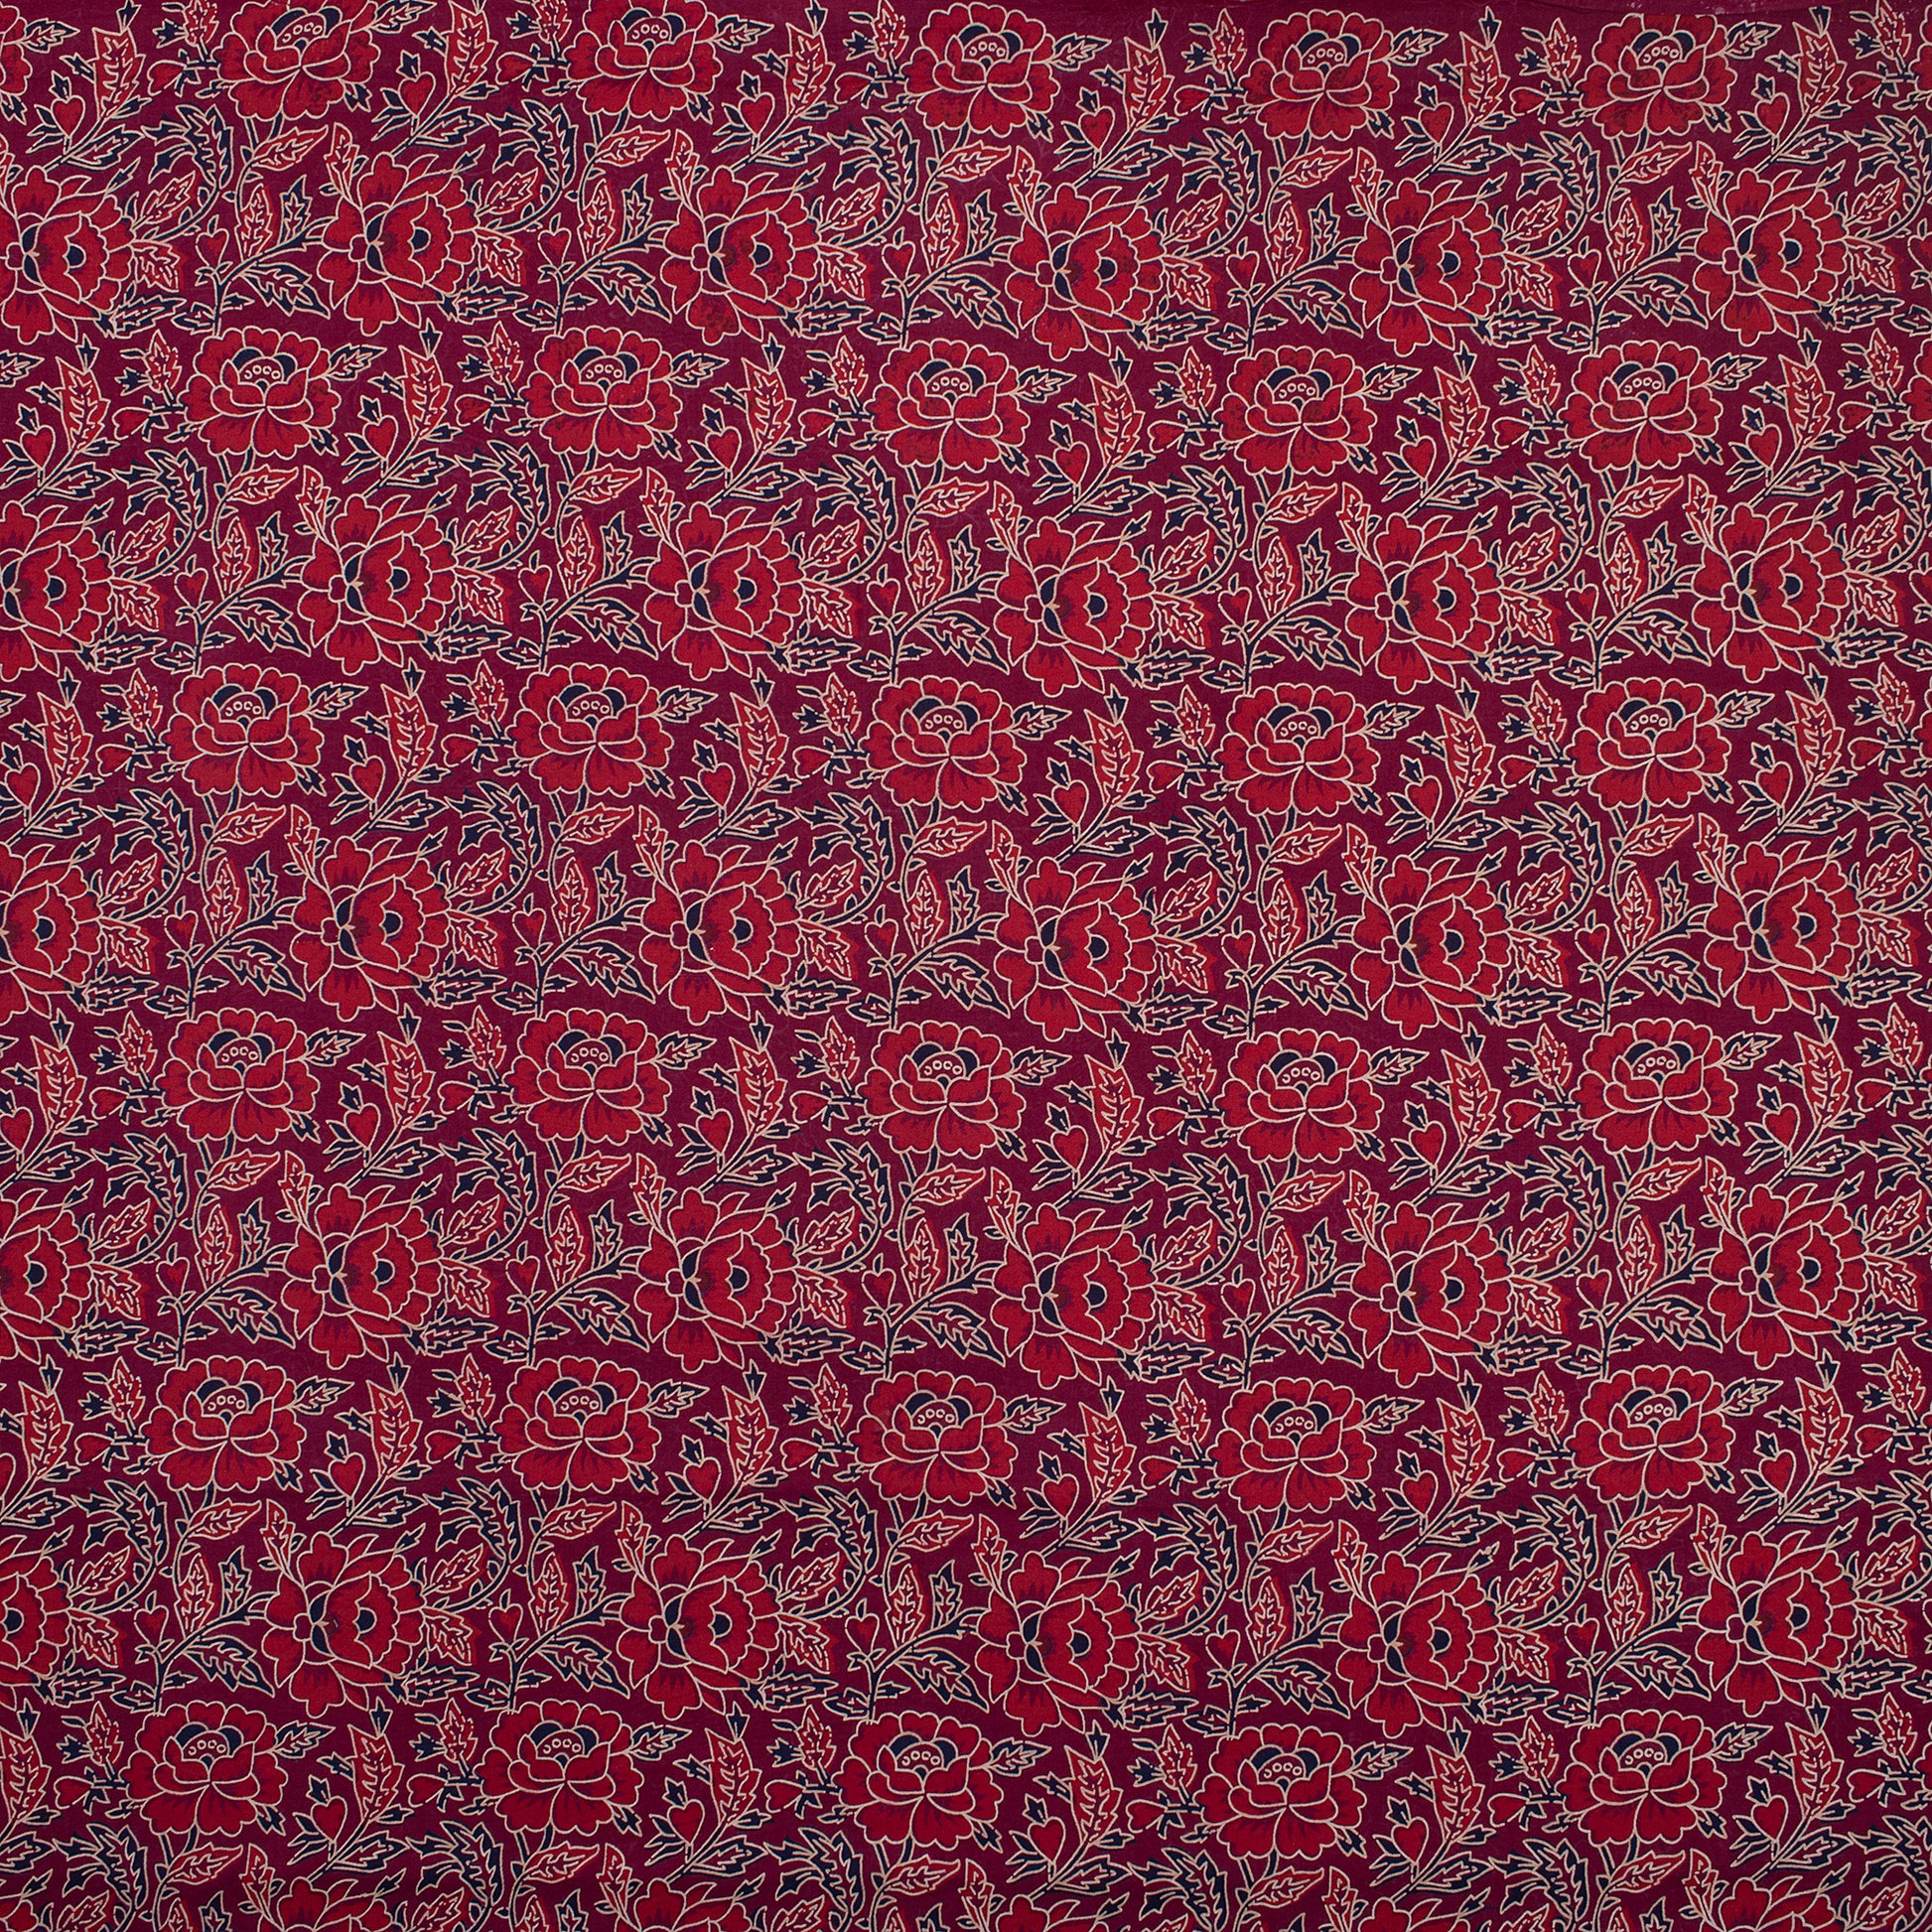 Running Fabric: Maroon Ajrakh Floral Block Printed Cotton Online